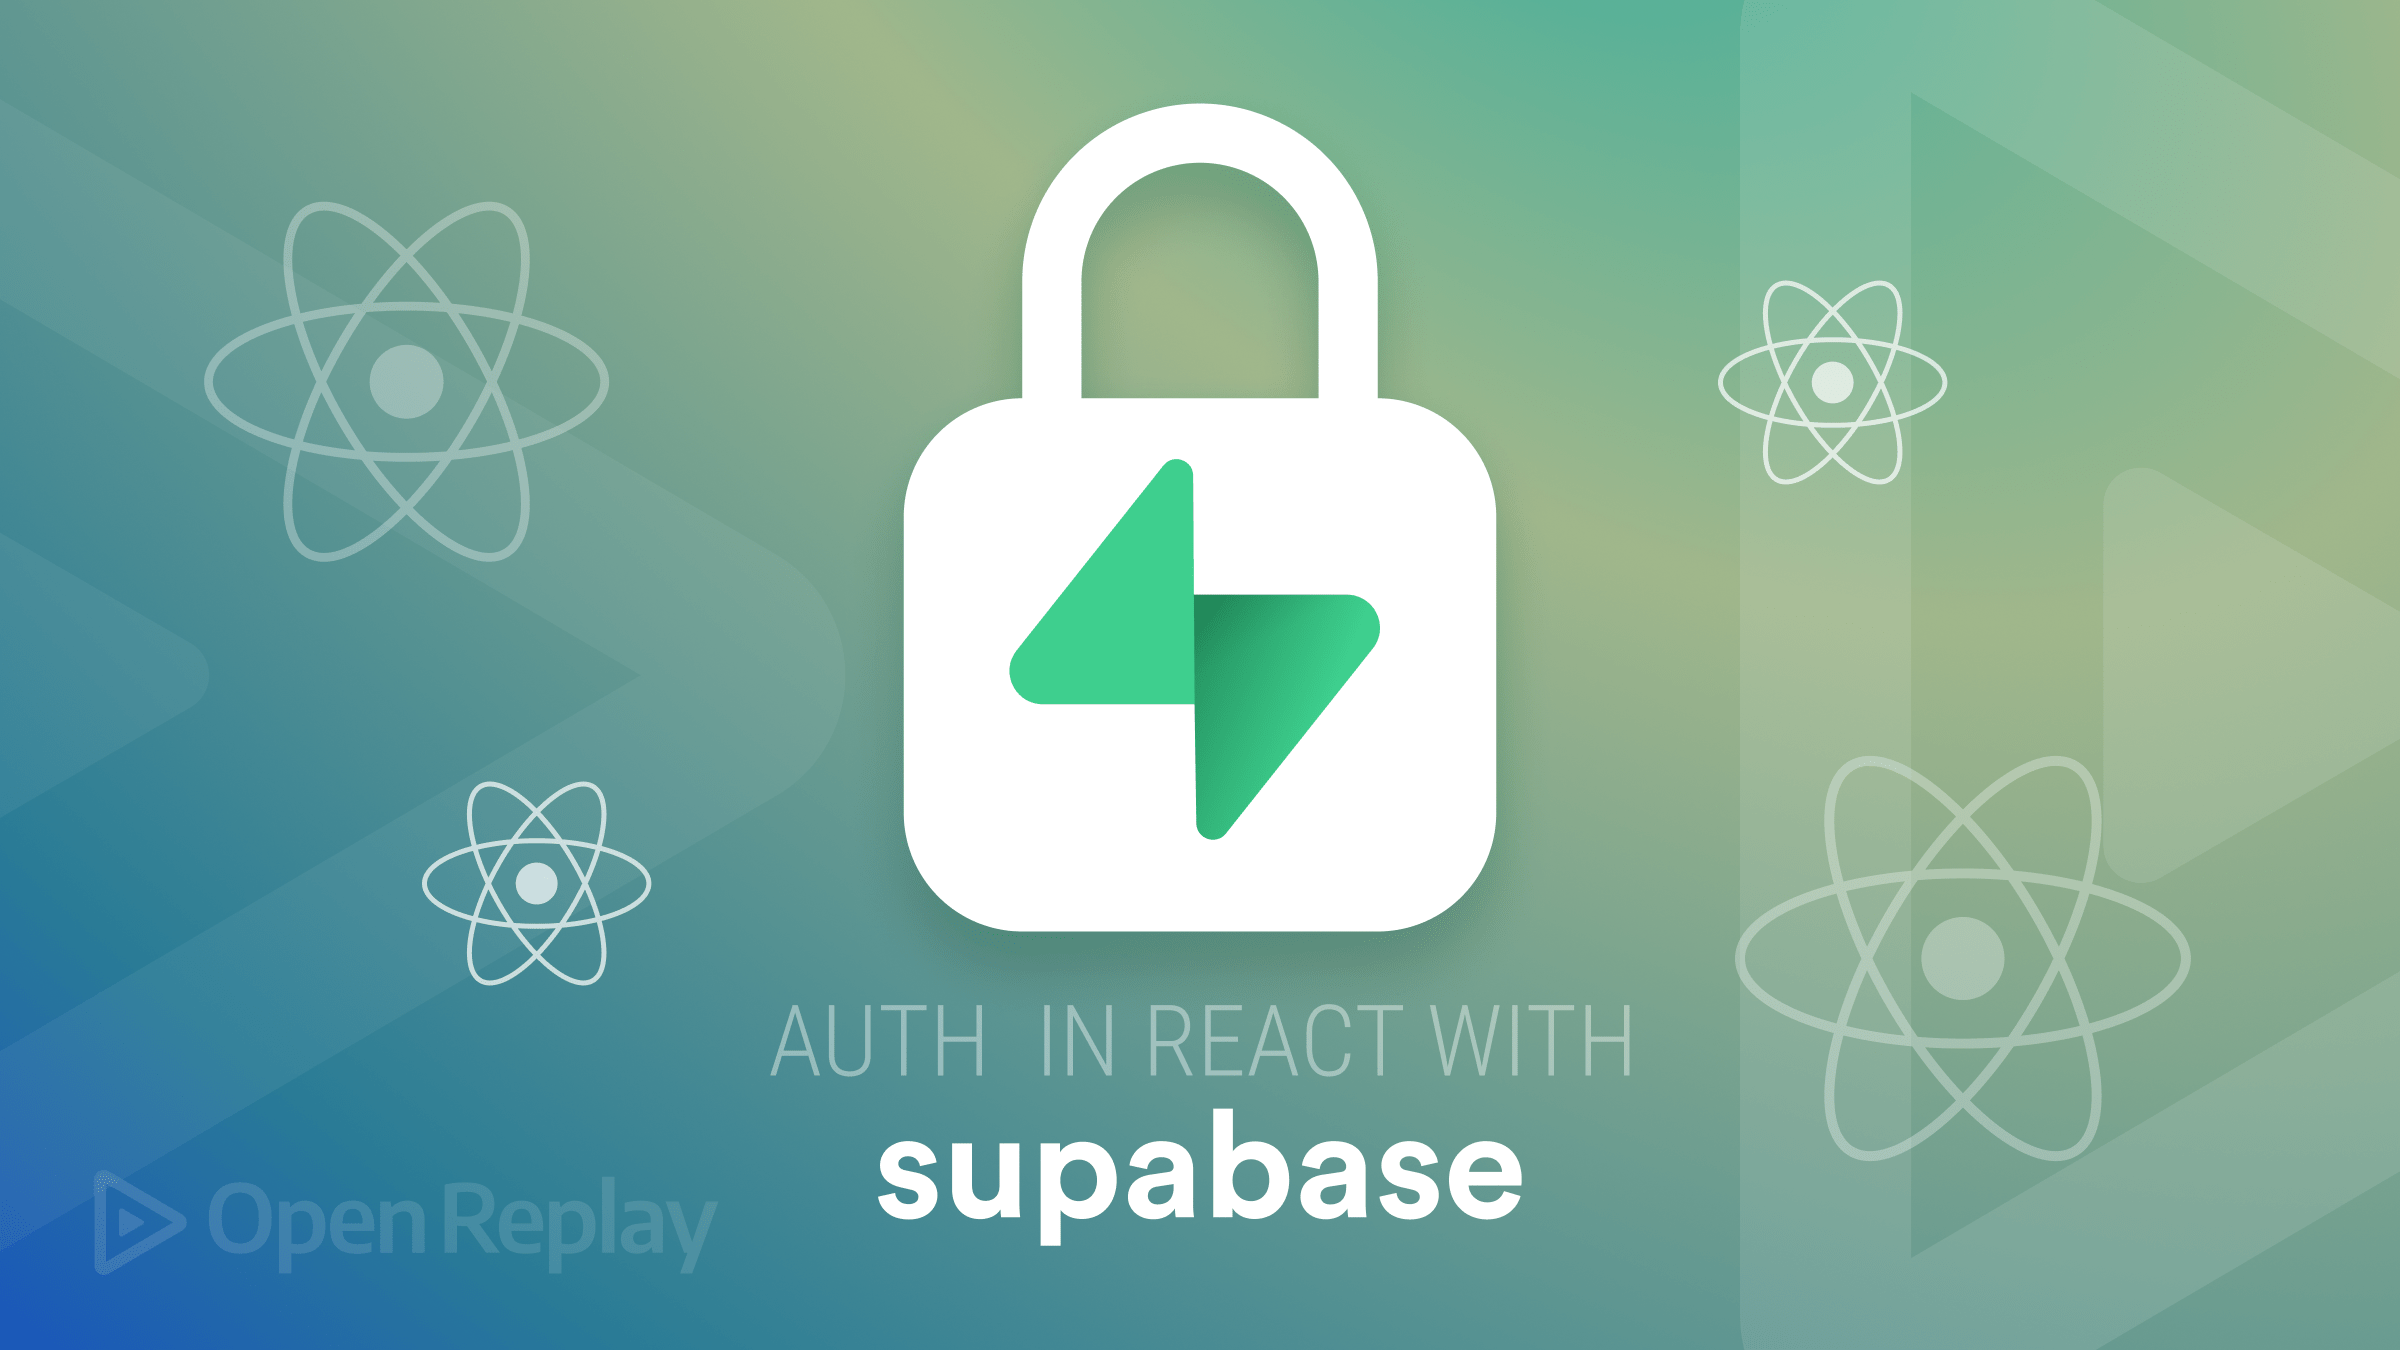 Authentication in React with Supabase